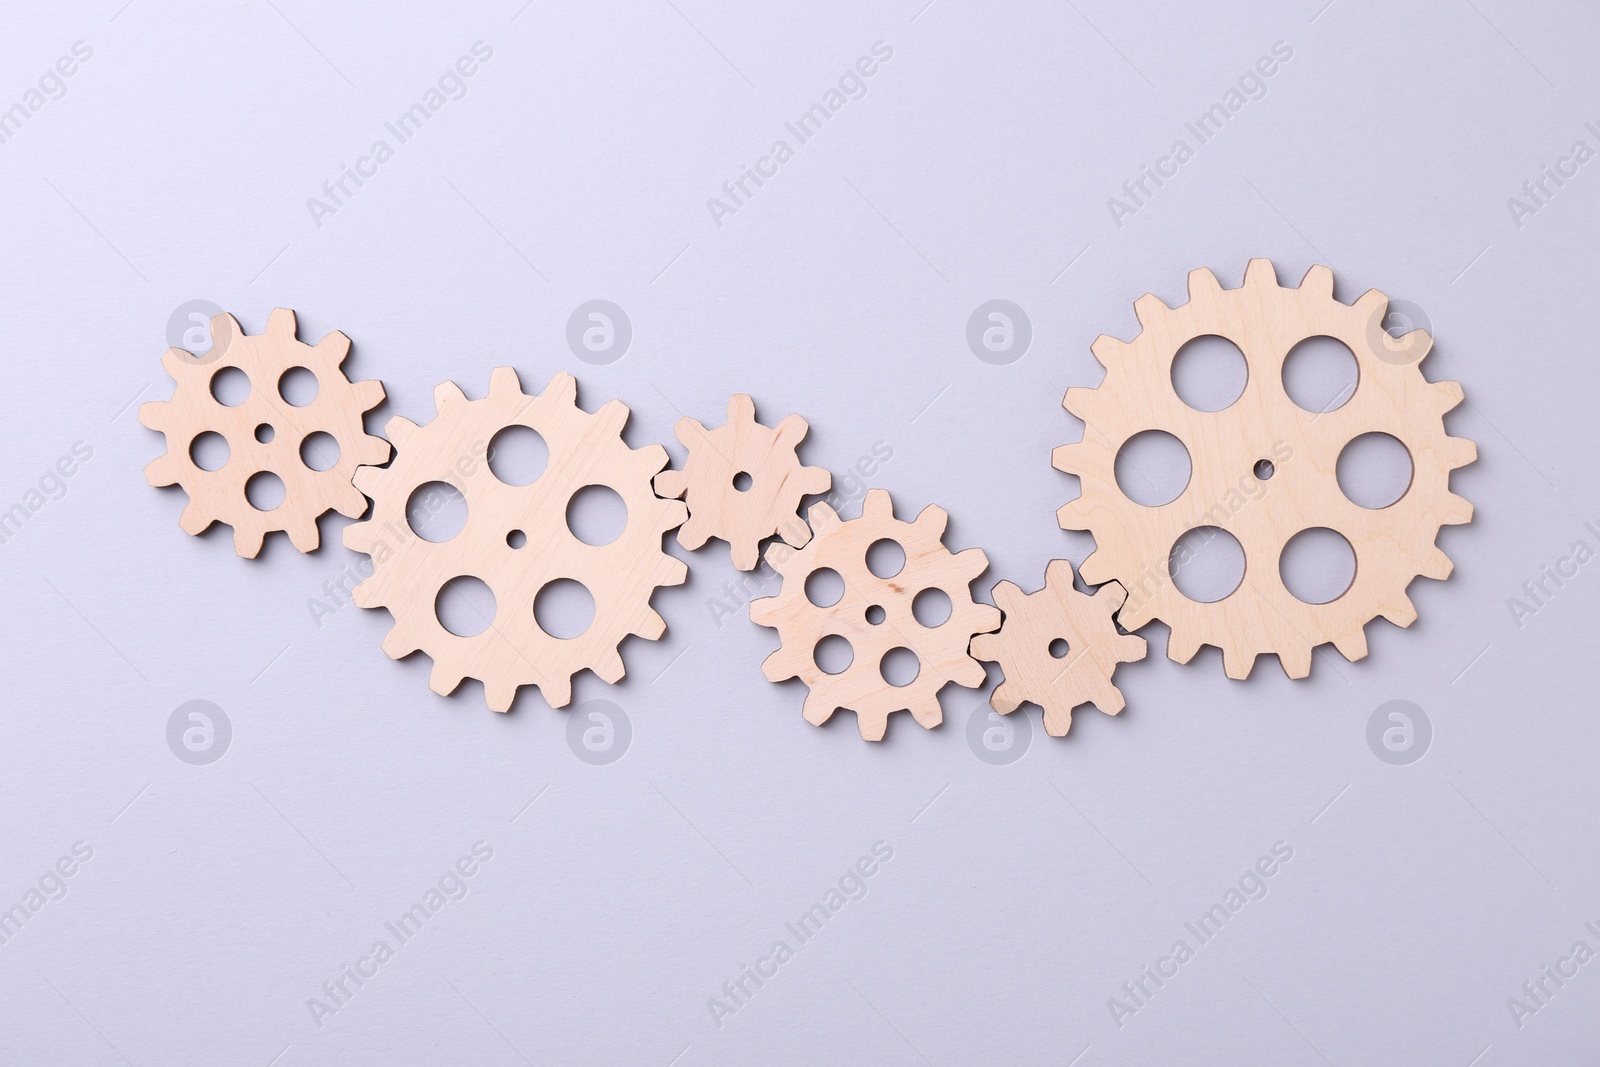 Photo of Business process organization and optimization. Scheme with wooden figures on light background, top view